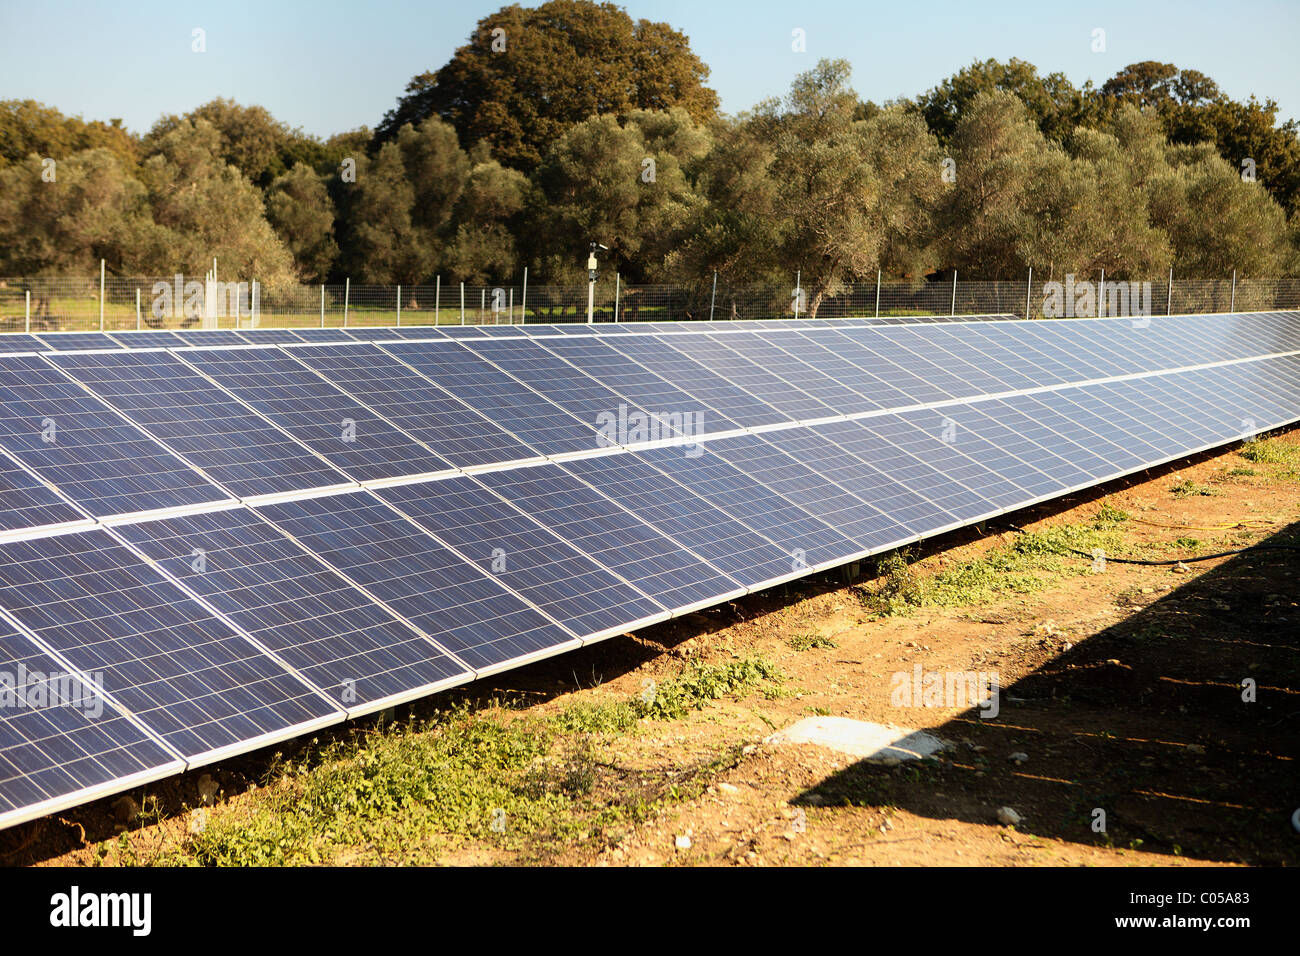 An array of solar panels on the island of Crete, Greece, with an olive grove in the background Stock Photo